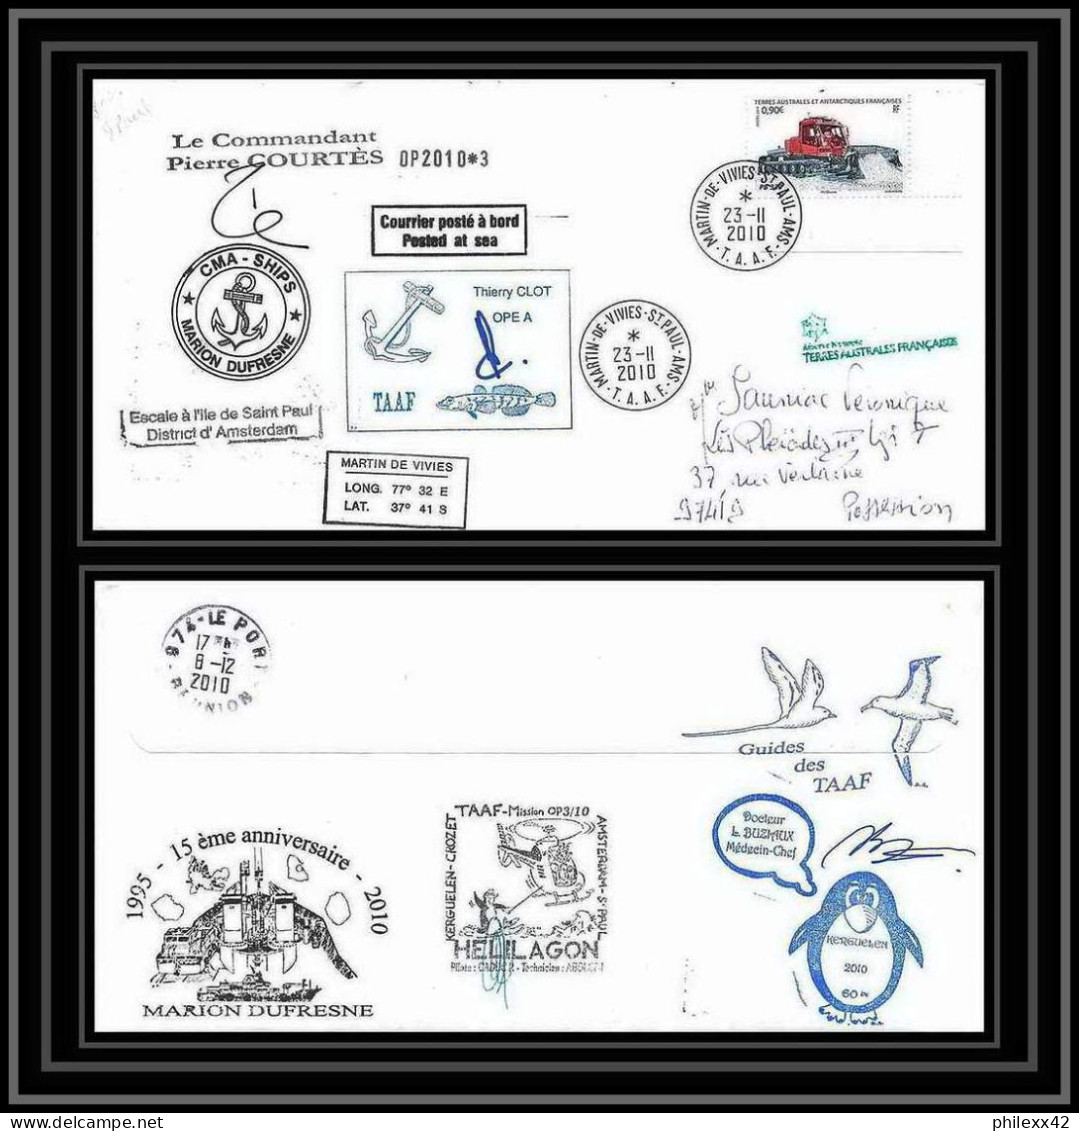 3046 Helilagon Dufresne Signé Signed Op 23/11/2010/3 St Paul N°565 Coin De Feuille Terres Australes (taaf) Lettre Cover - Helicopters